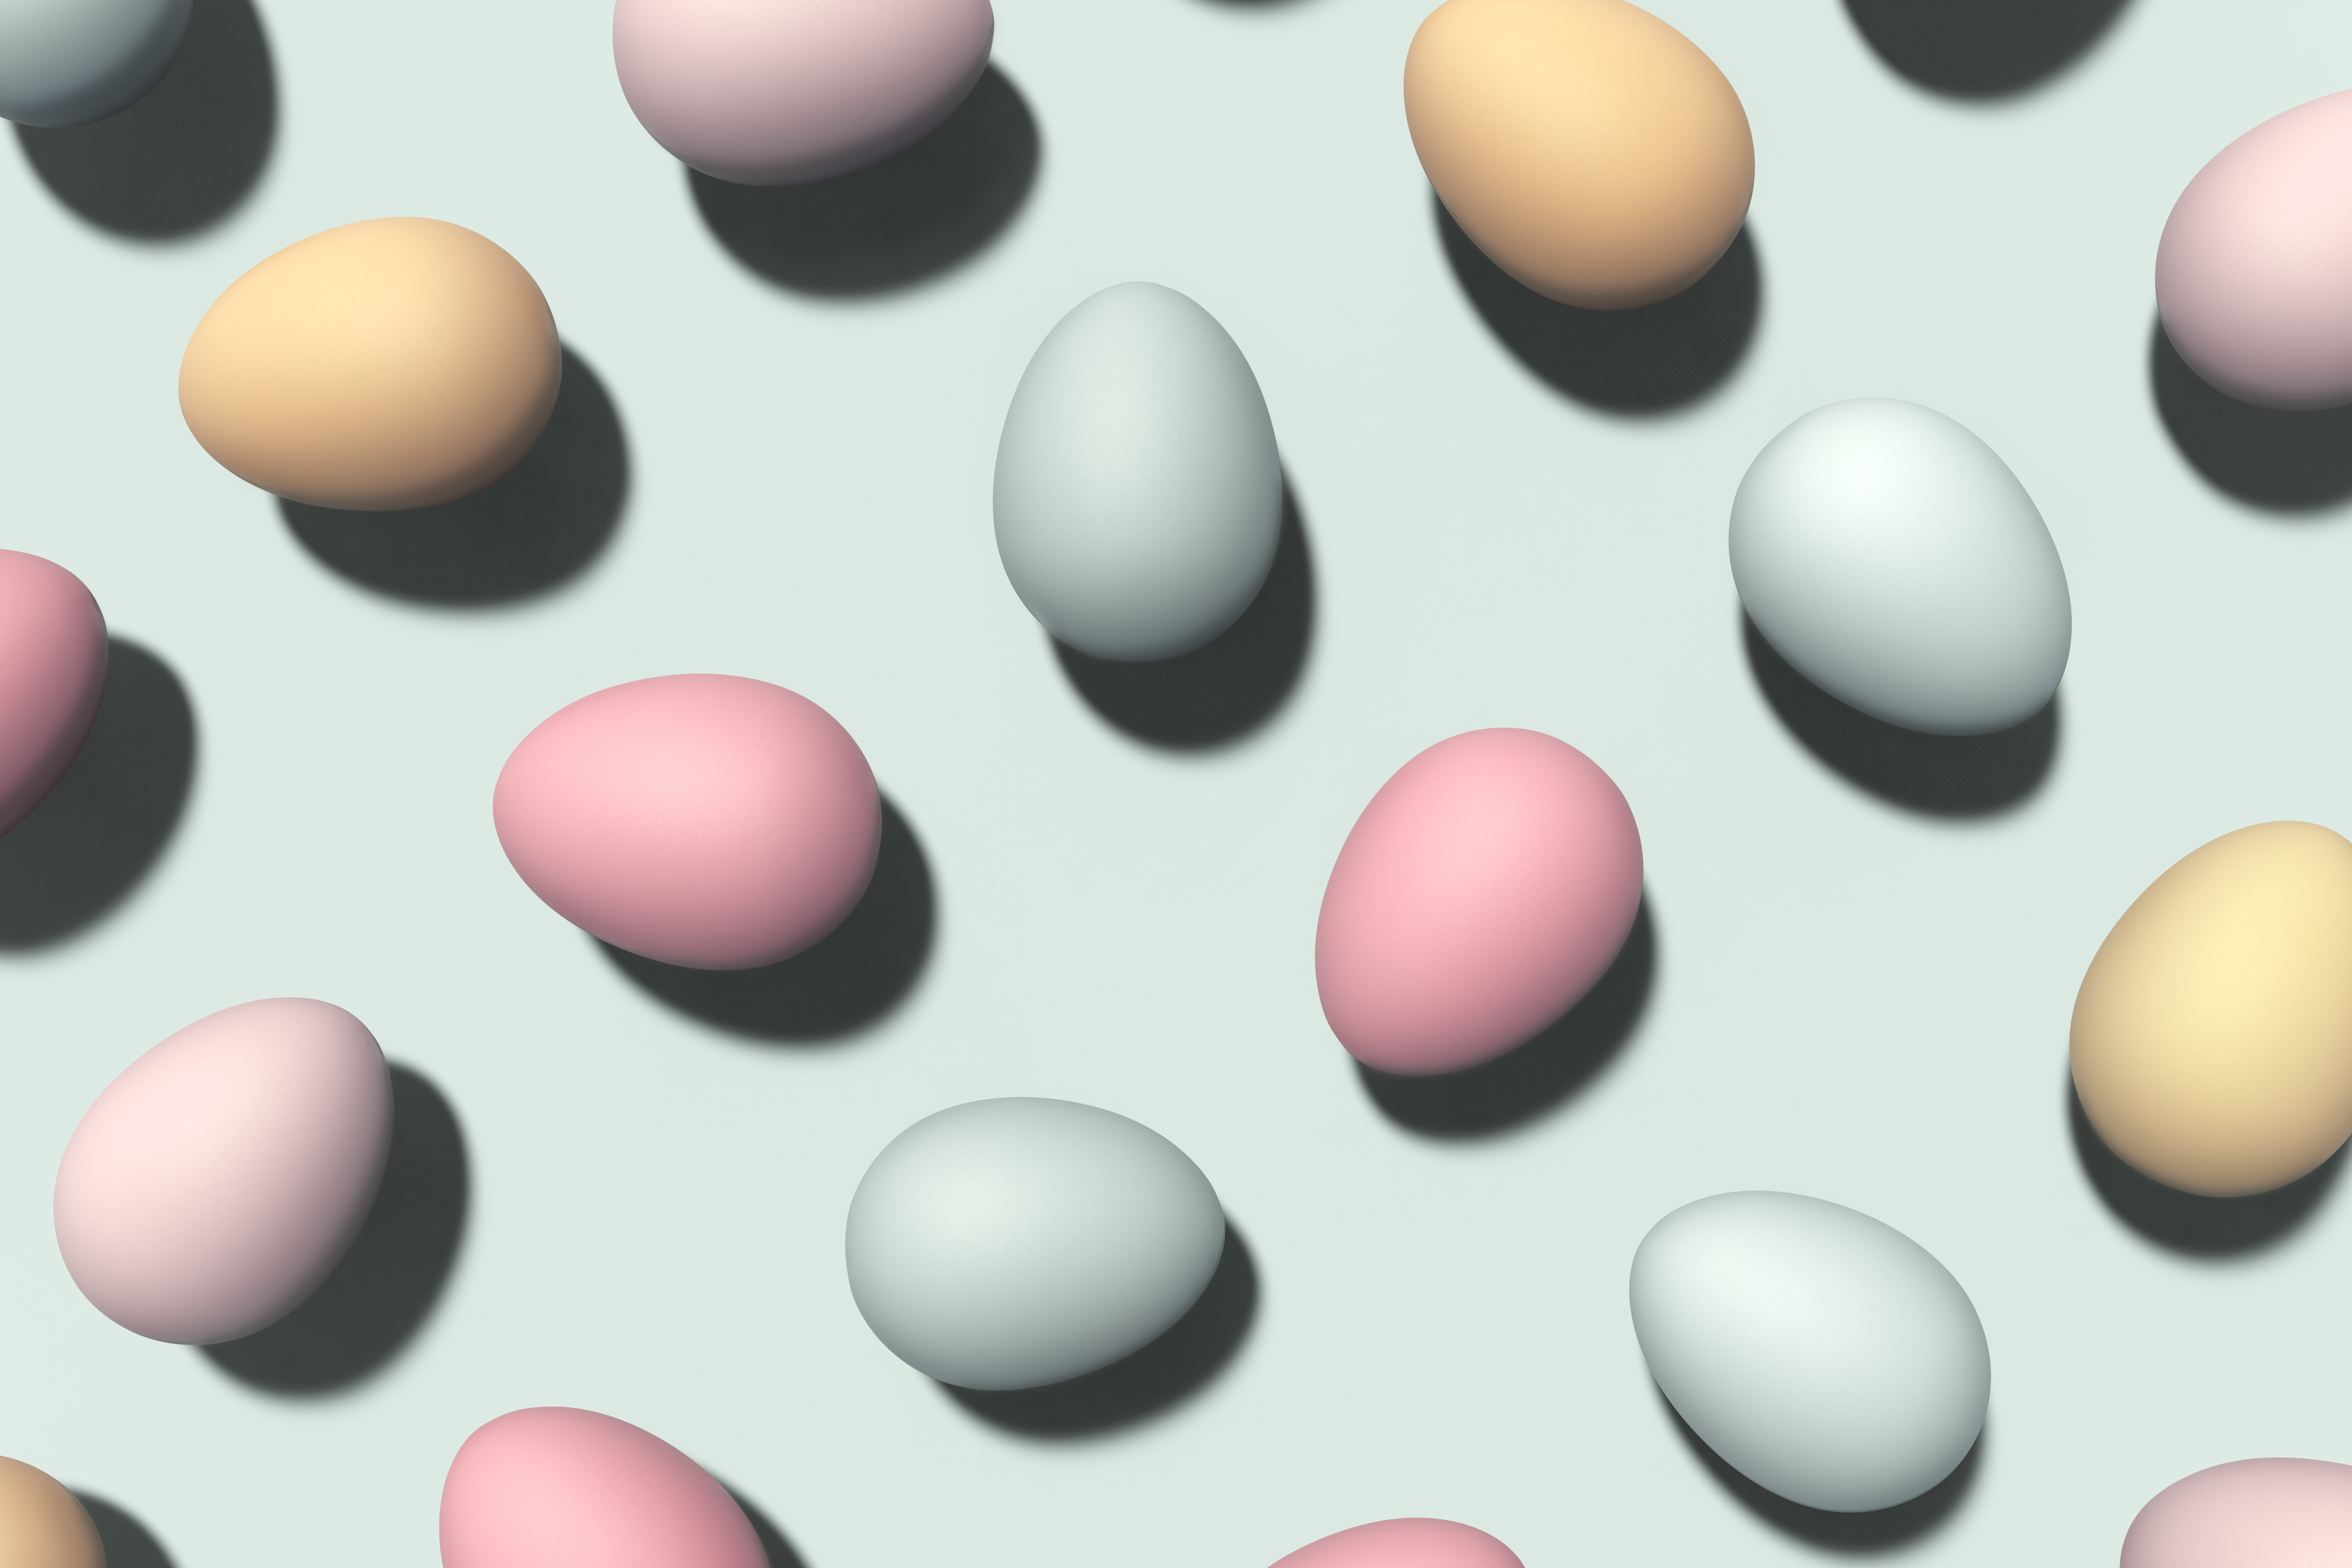 Image of several 3D-rendered eggs on a flat surface, in varying pastel tones